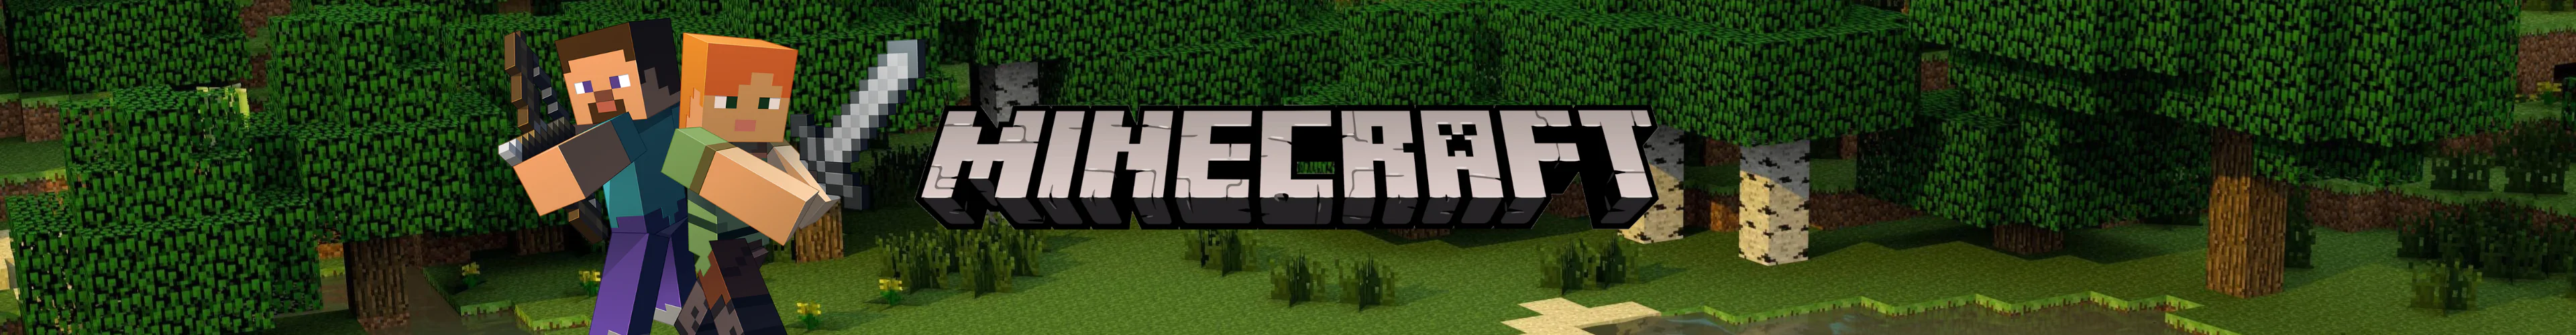 Minecraft lamps banner